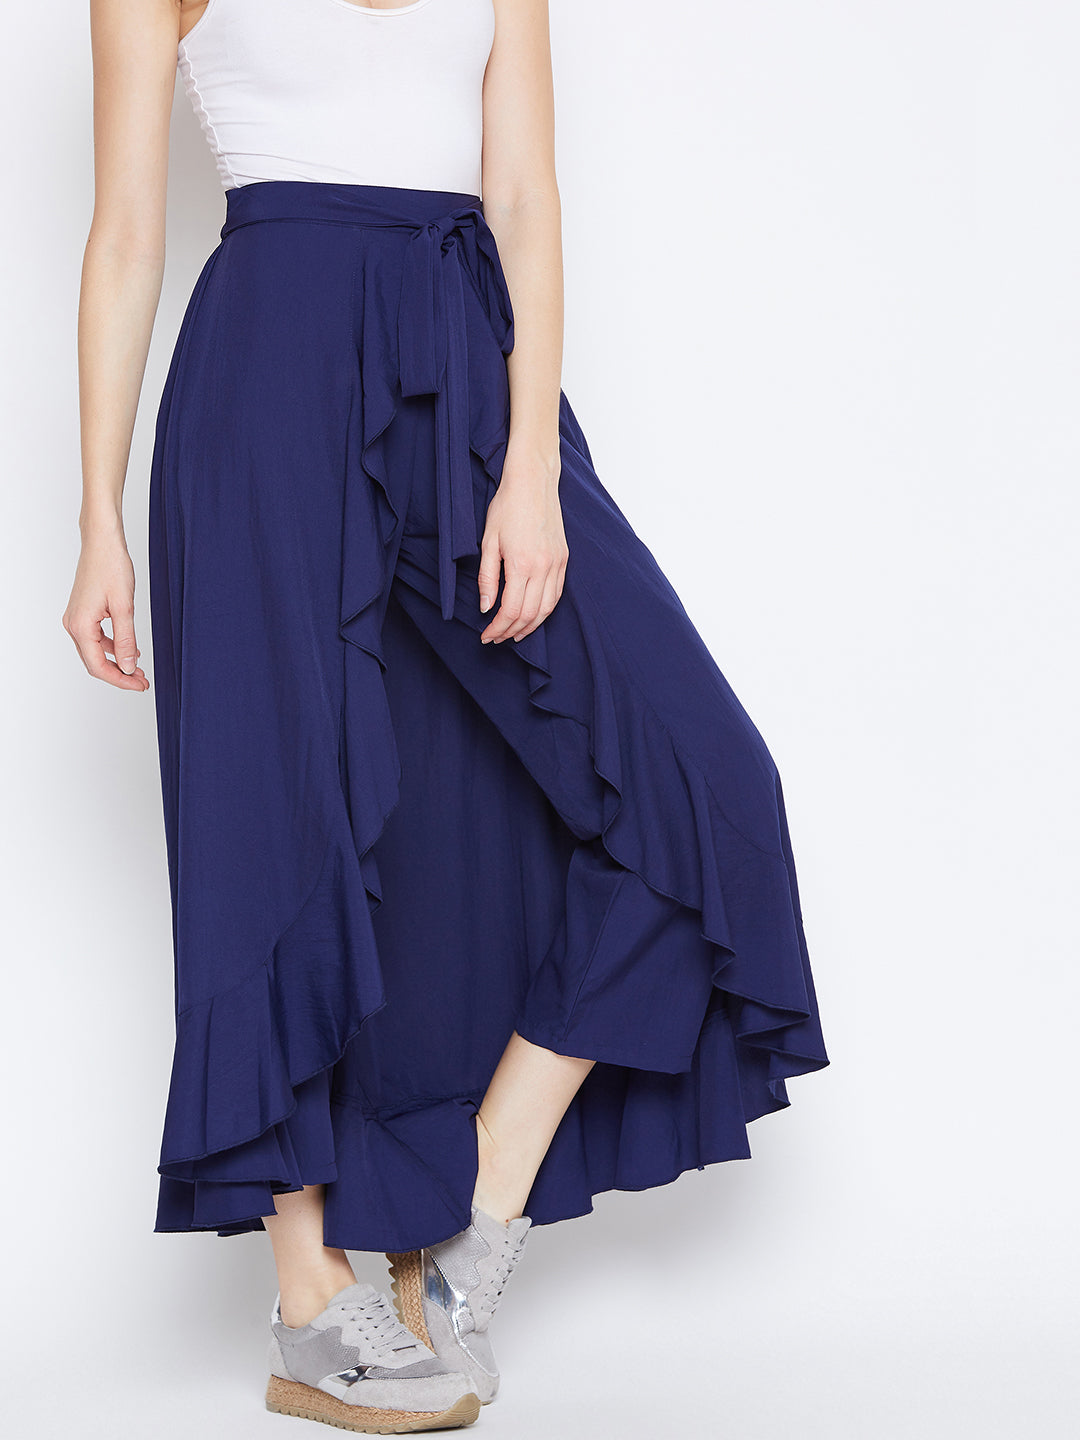 Details more than 82 navy high low skirt best